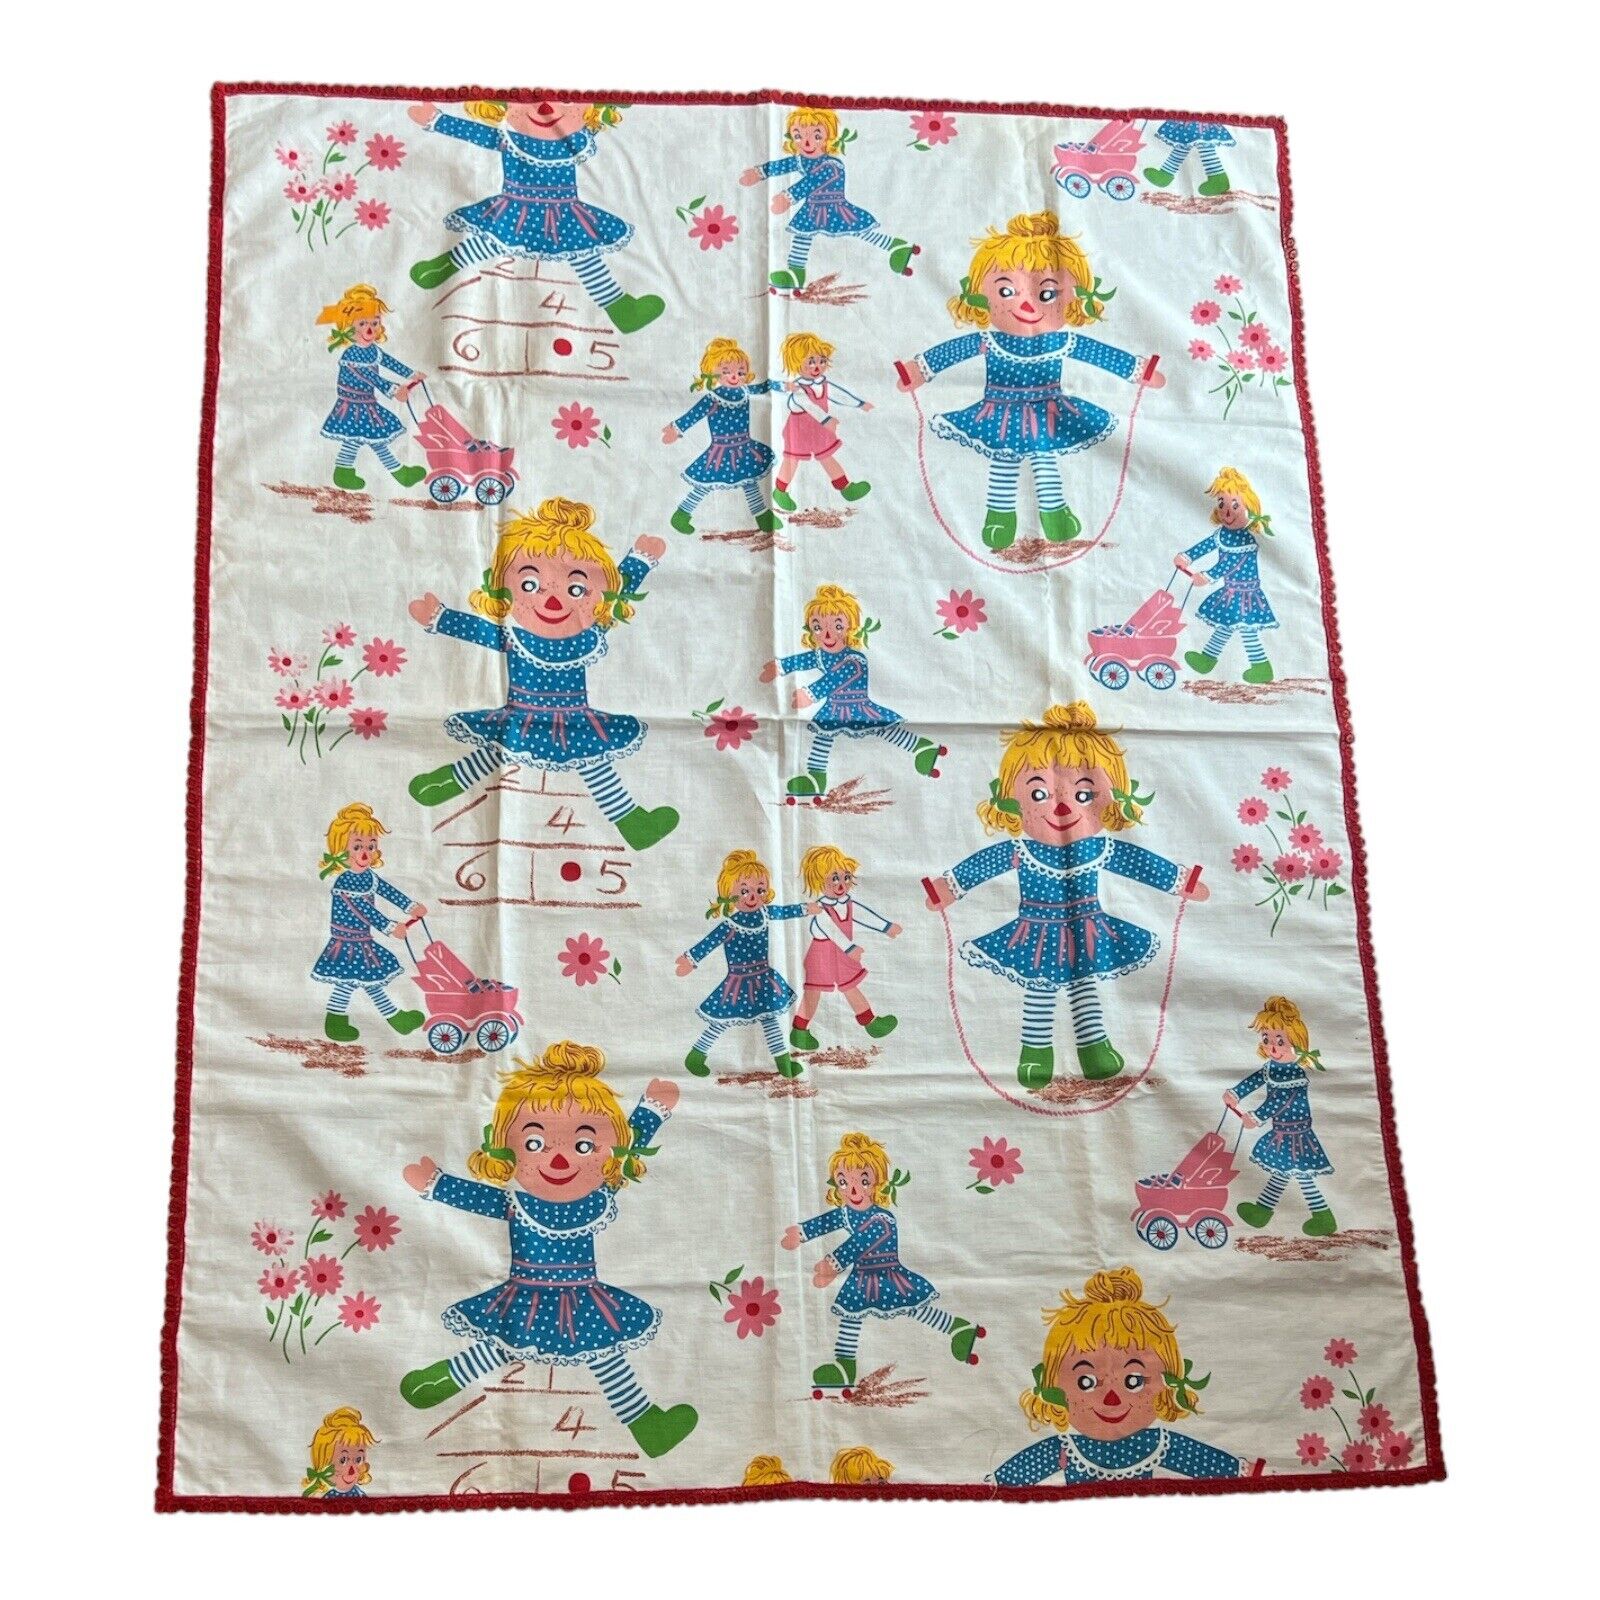 Vintage Little Girl Doll Playground Blanket Bedspread Table Cloth Excellent